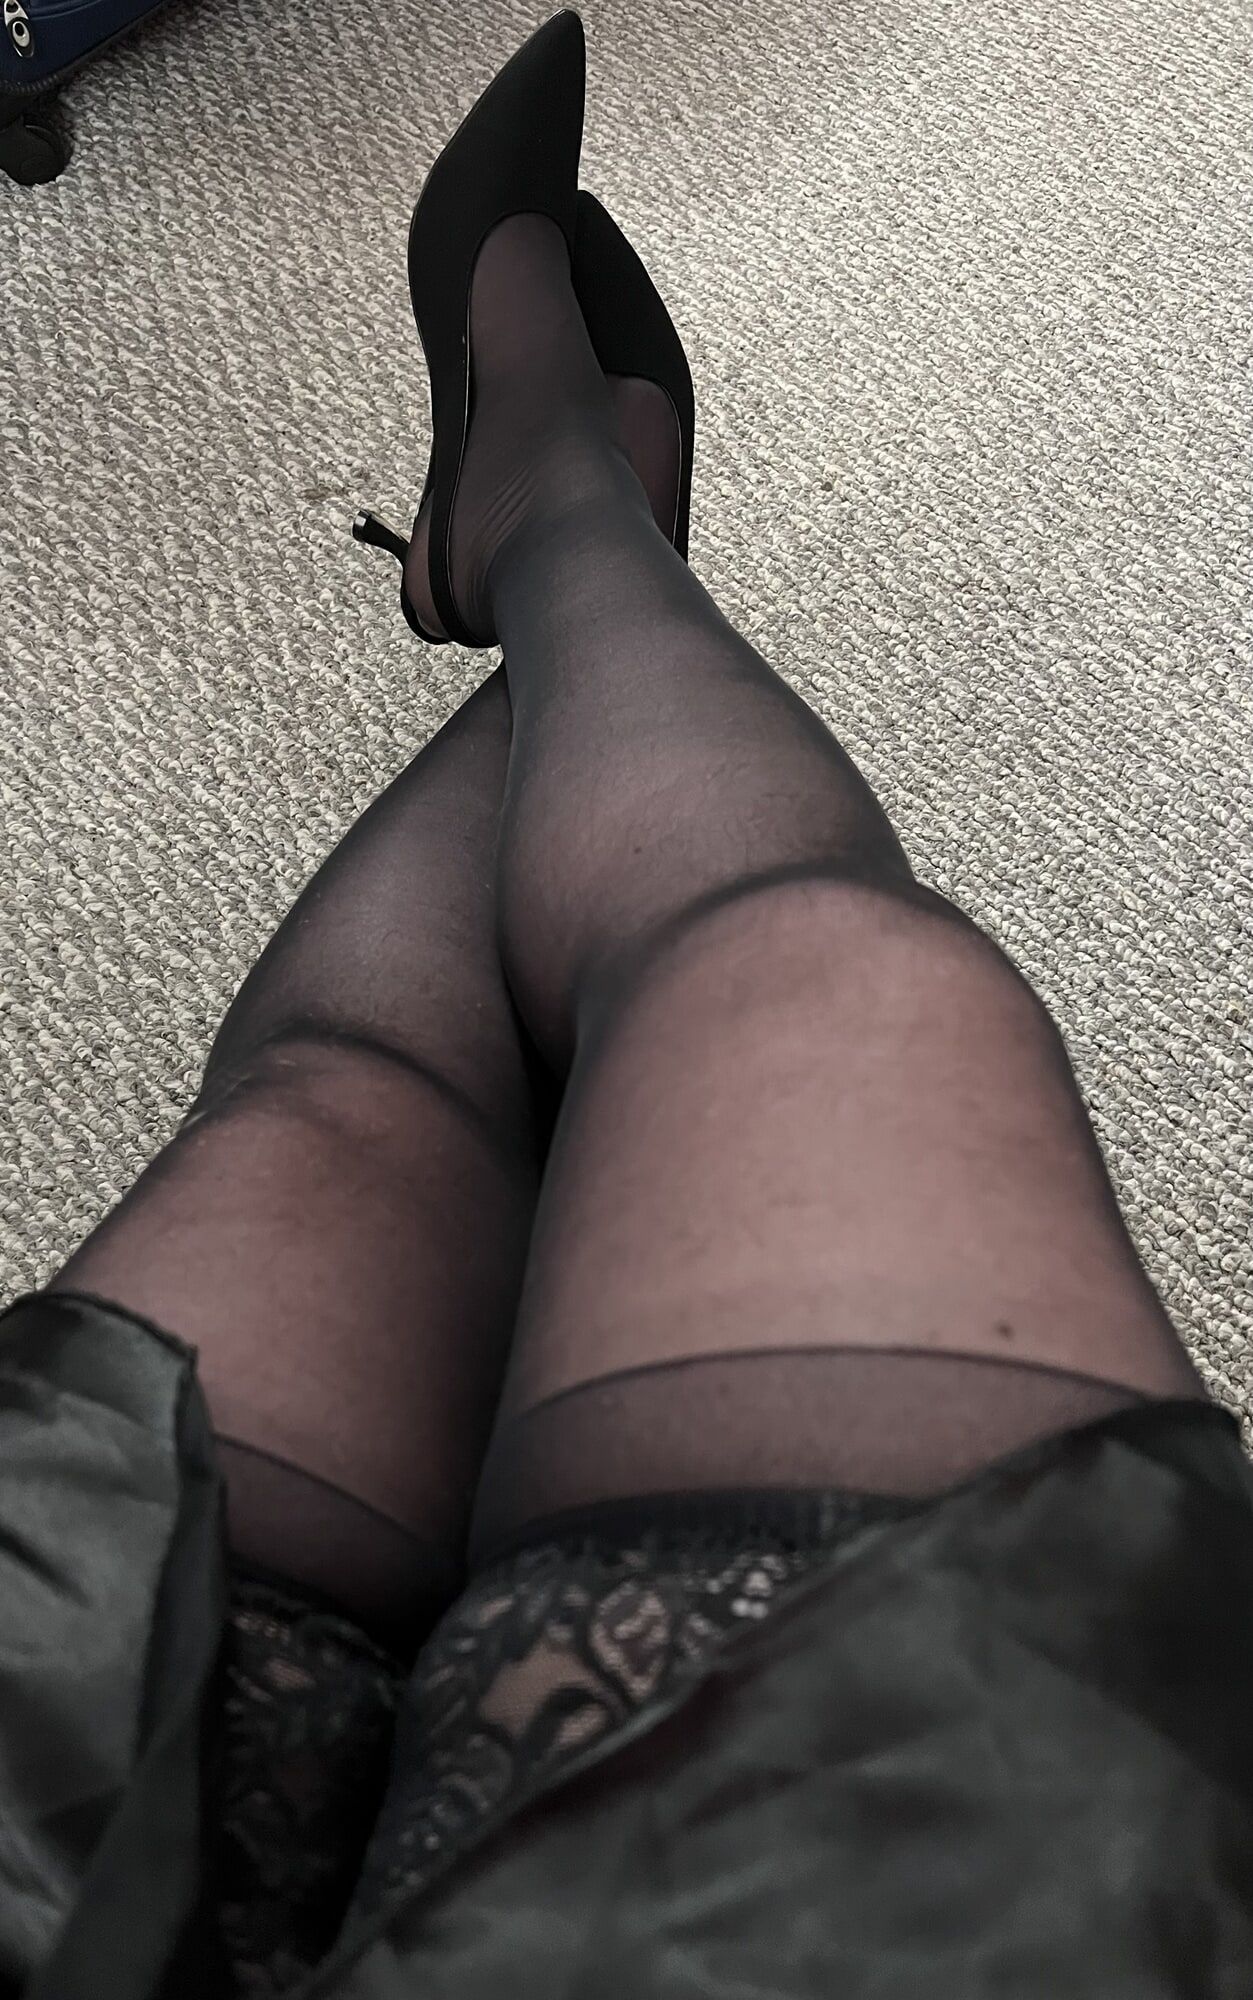 My first time wearing nylons and heels.